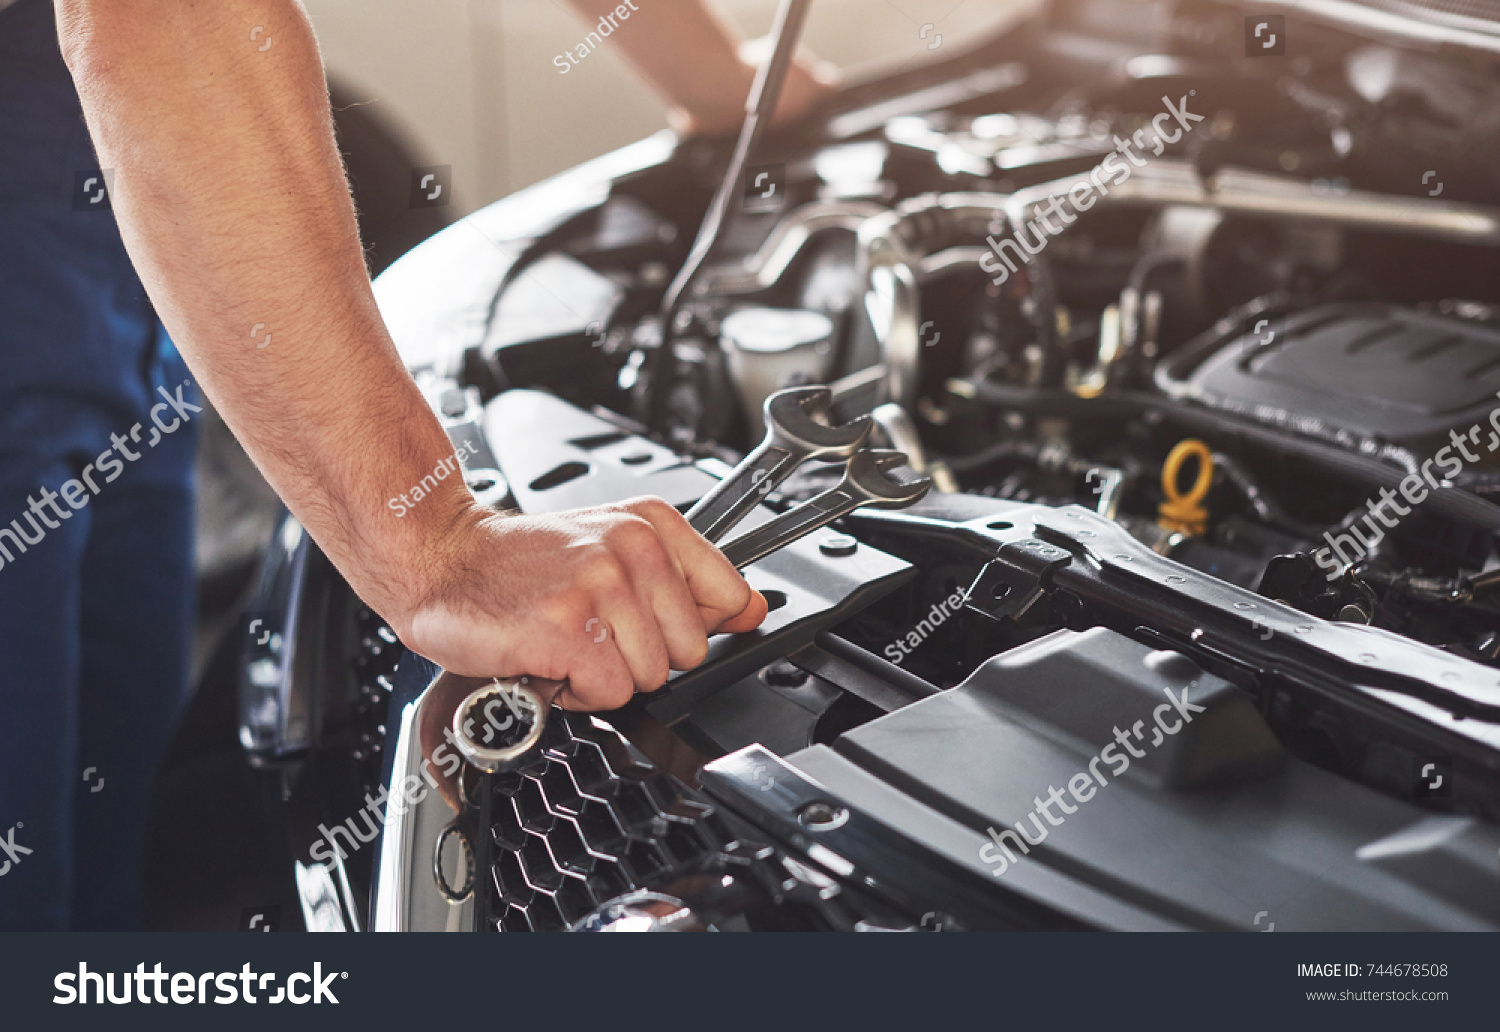 stock-photo-picture-showing-muscular-car-service-worker-repairing-vehicle-744678508.jpg